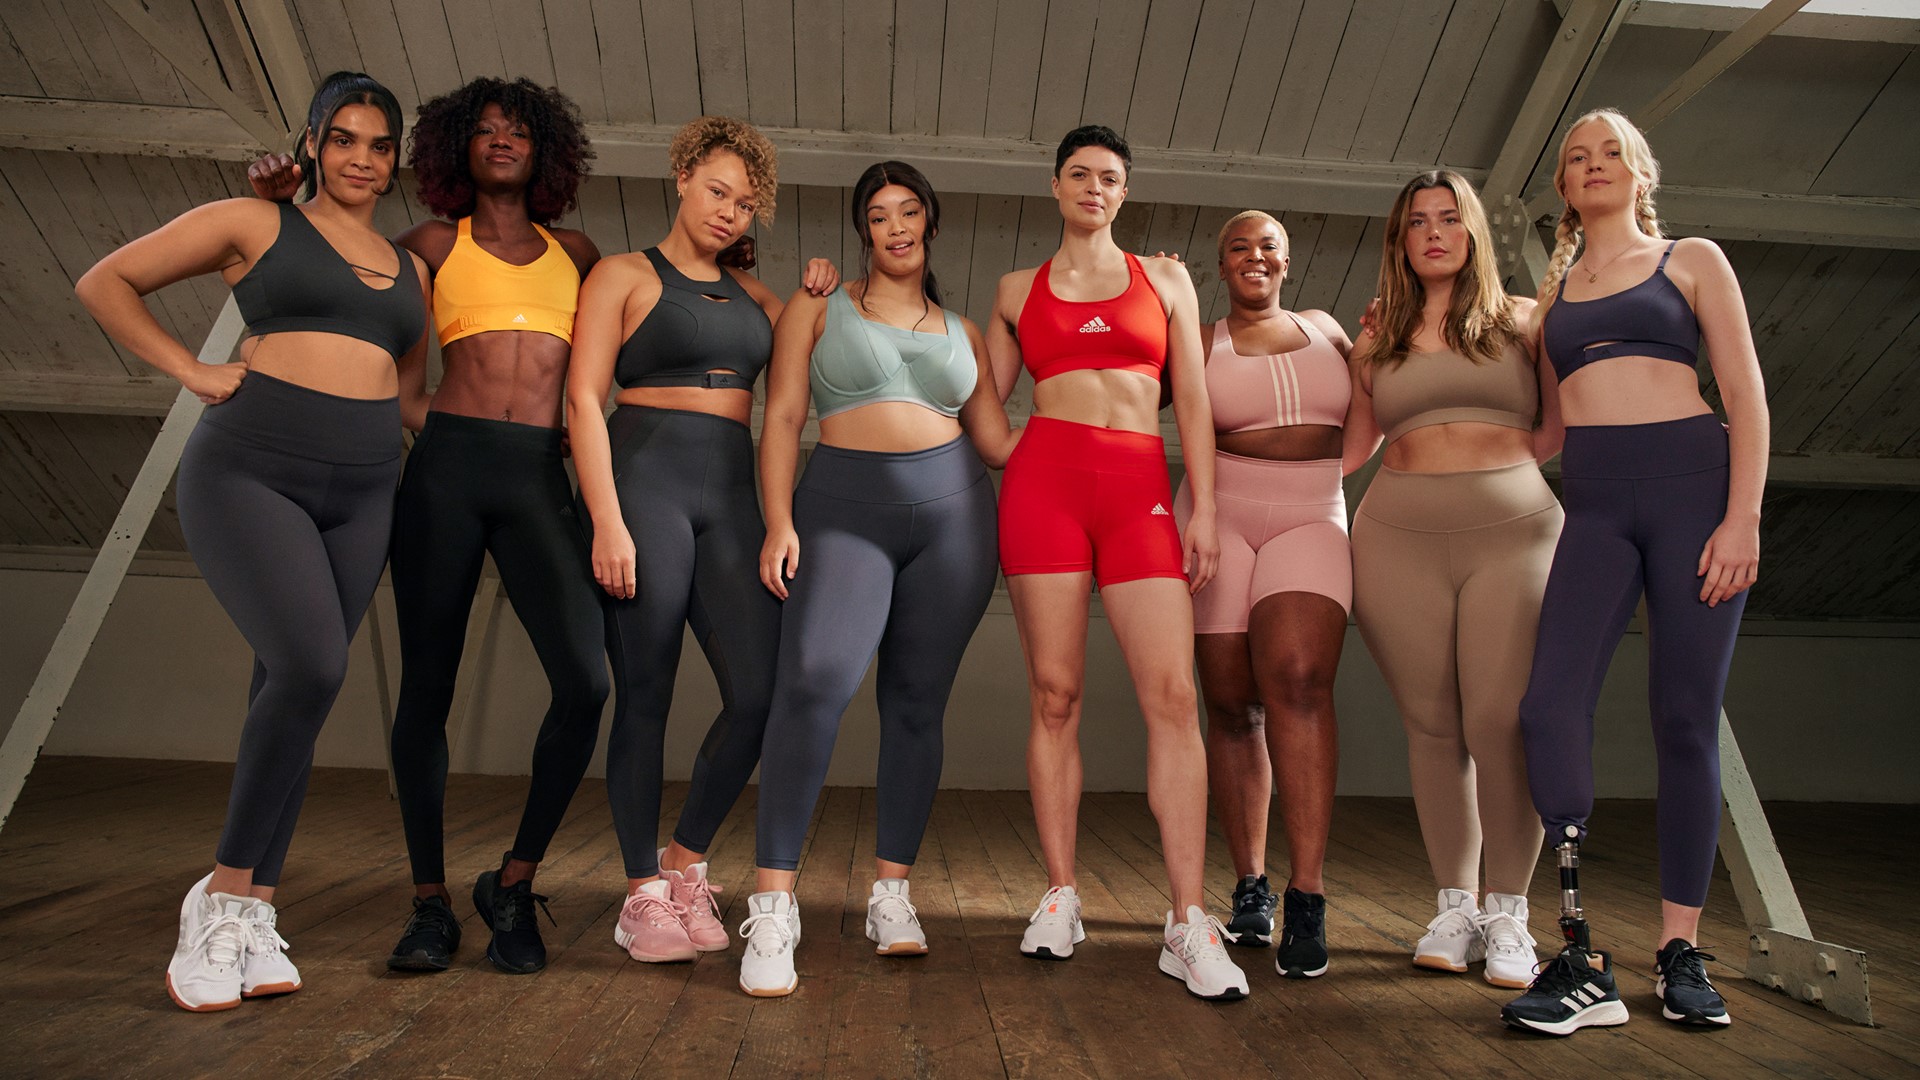 Support For All: Why We Re-Engineered Our Entire Sports Bra Portfolio